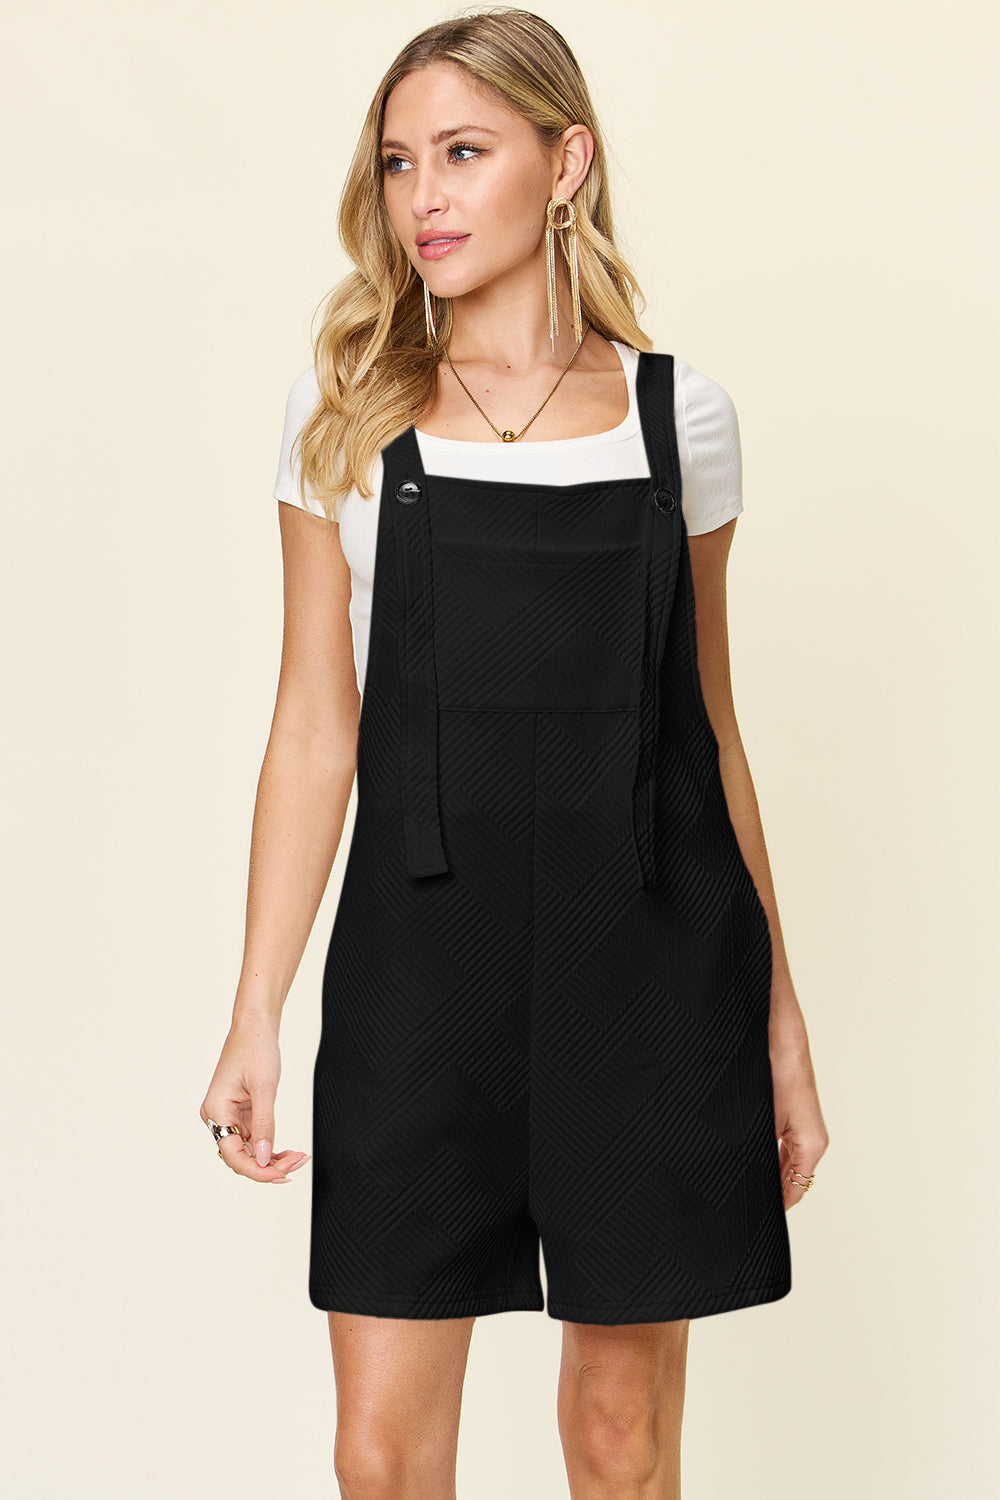 Lean in to your playful side with this black romper... flattering on any body shape and size. Get yours today!